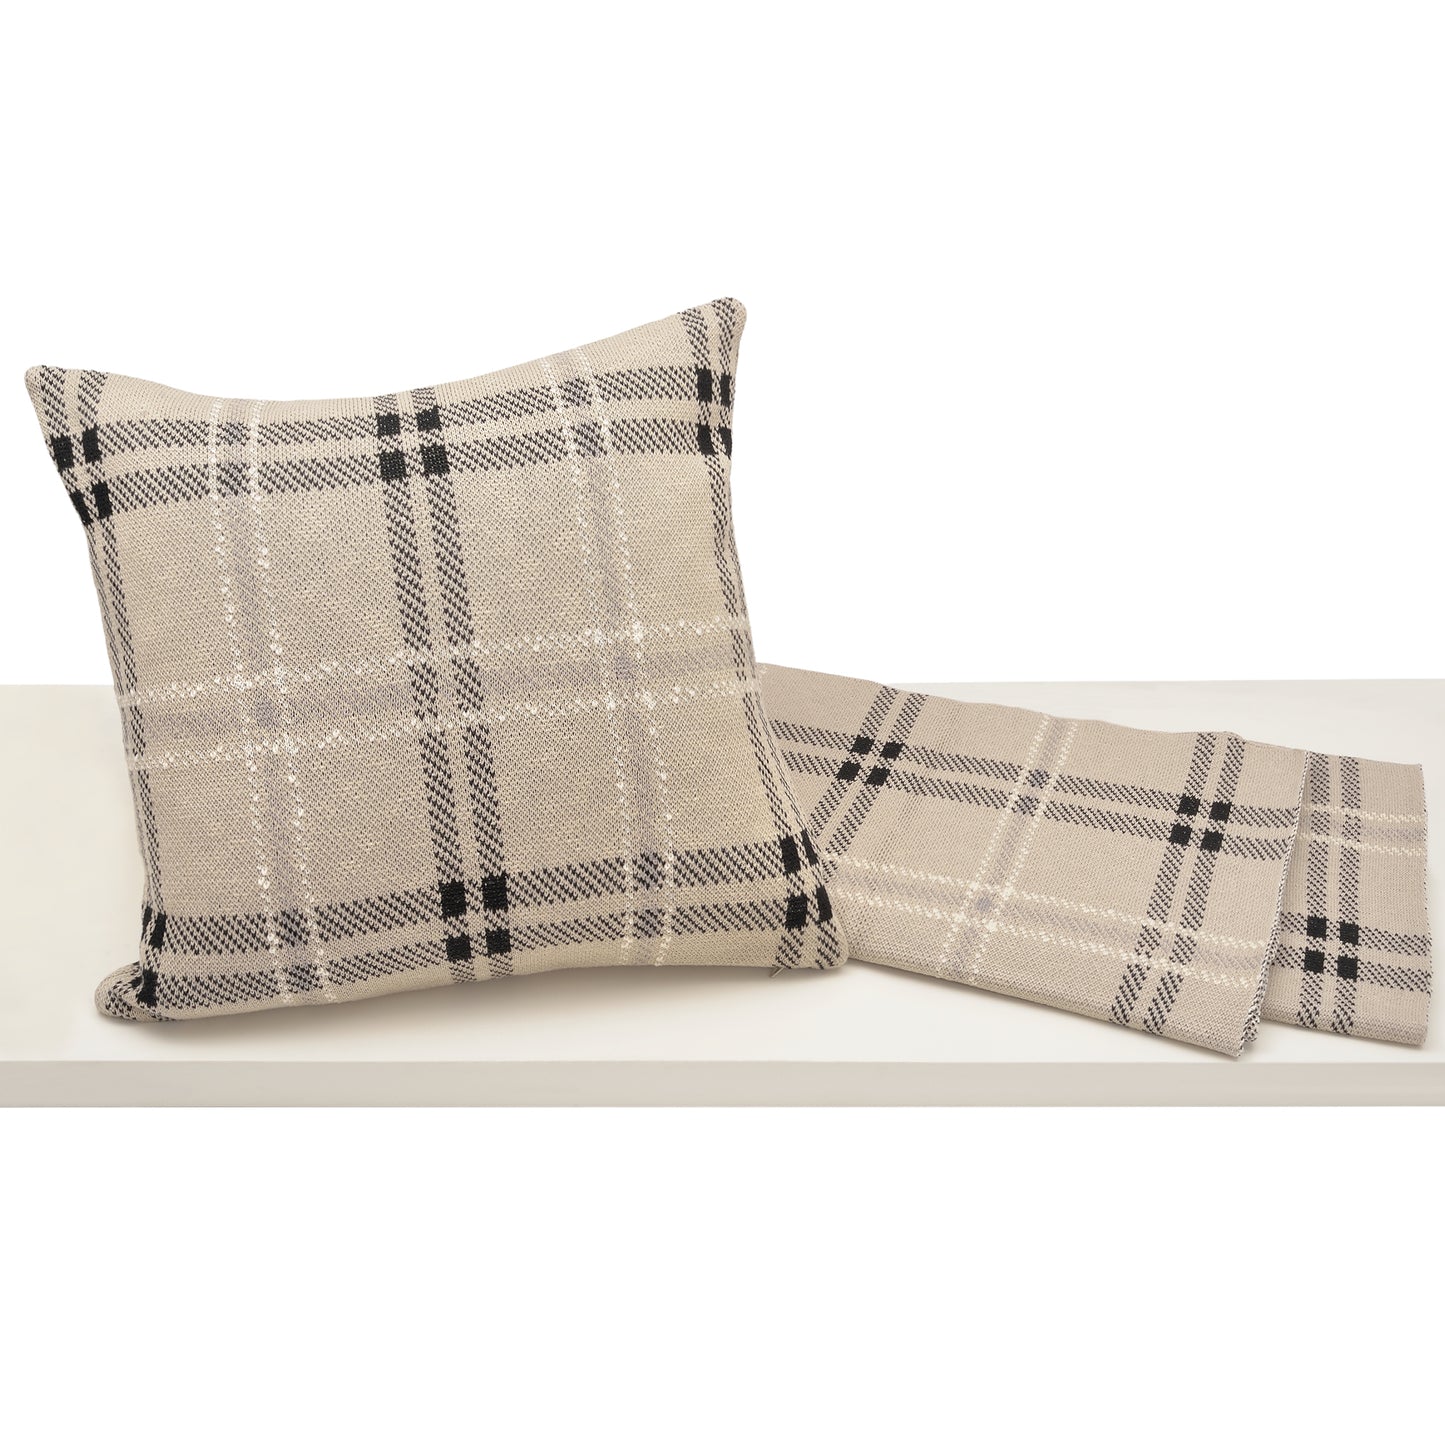 Oliver Plaid Pillow and Throw Set - Sand